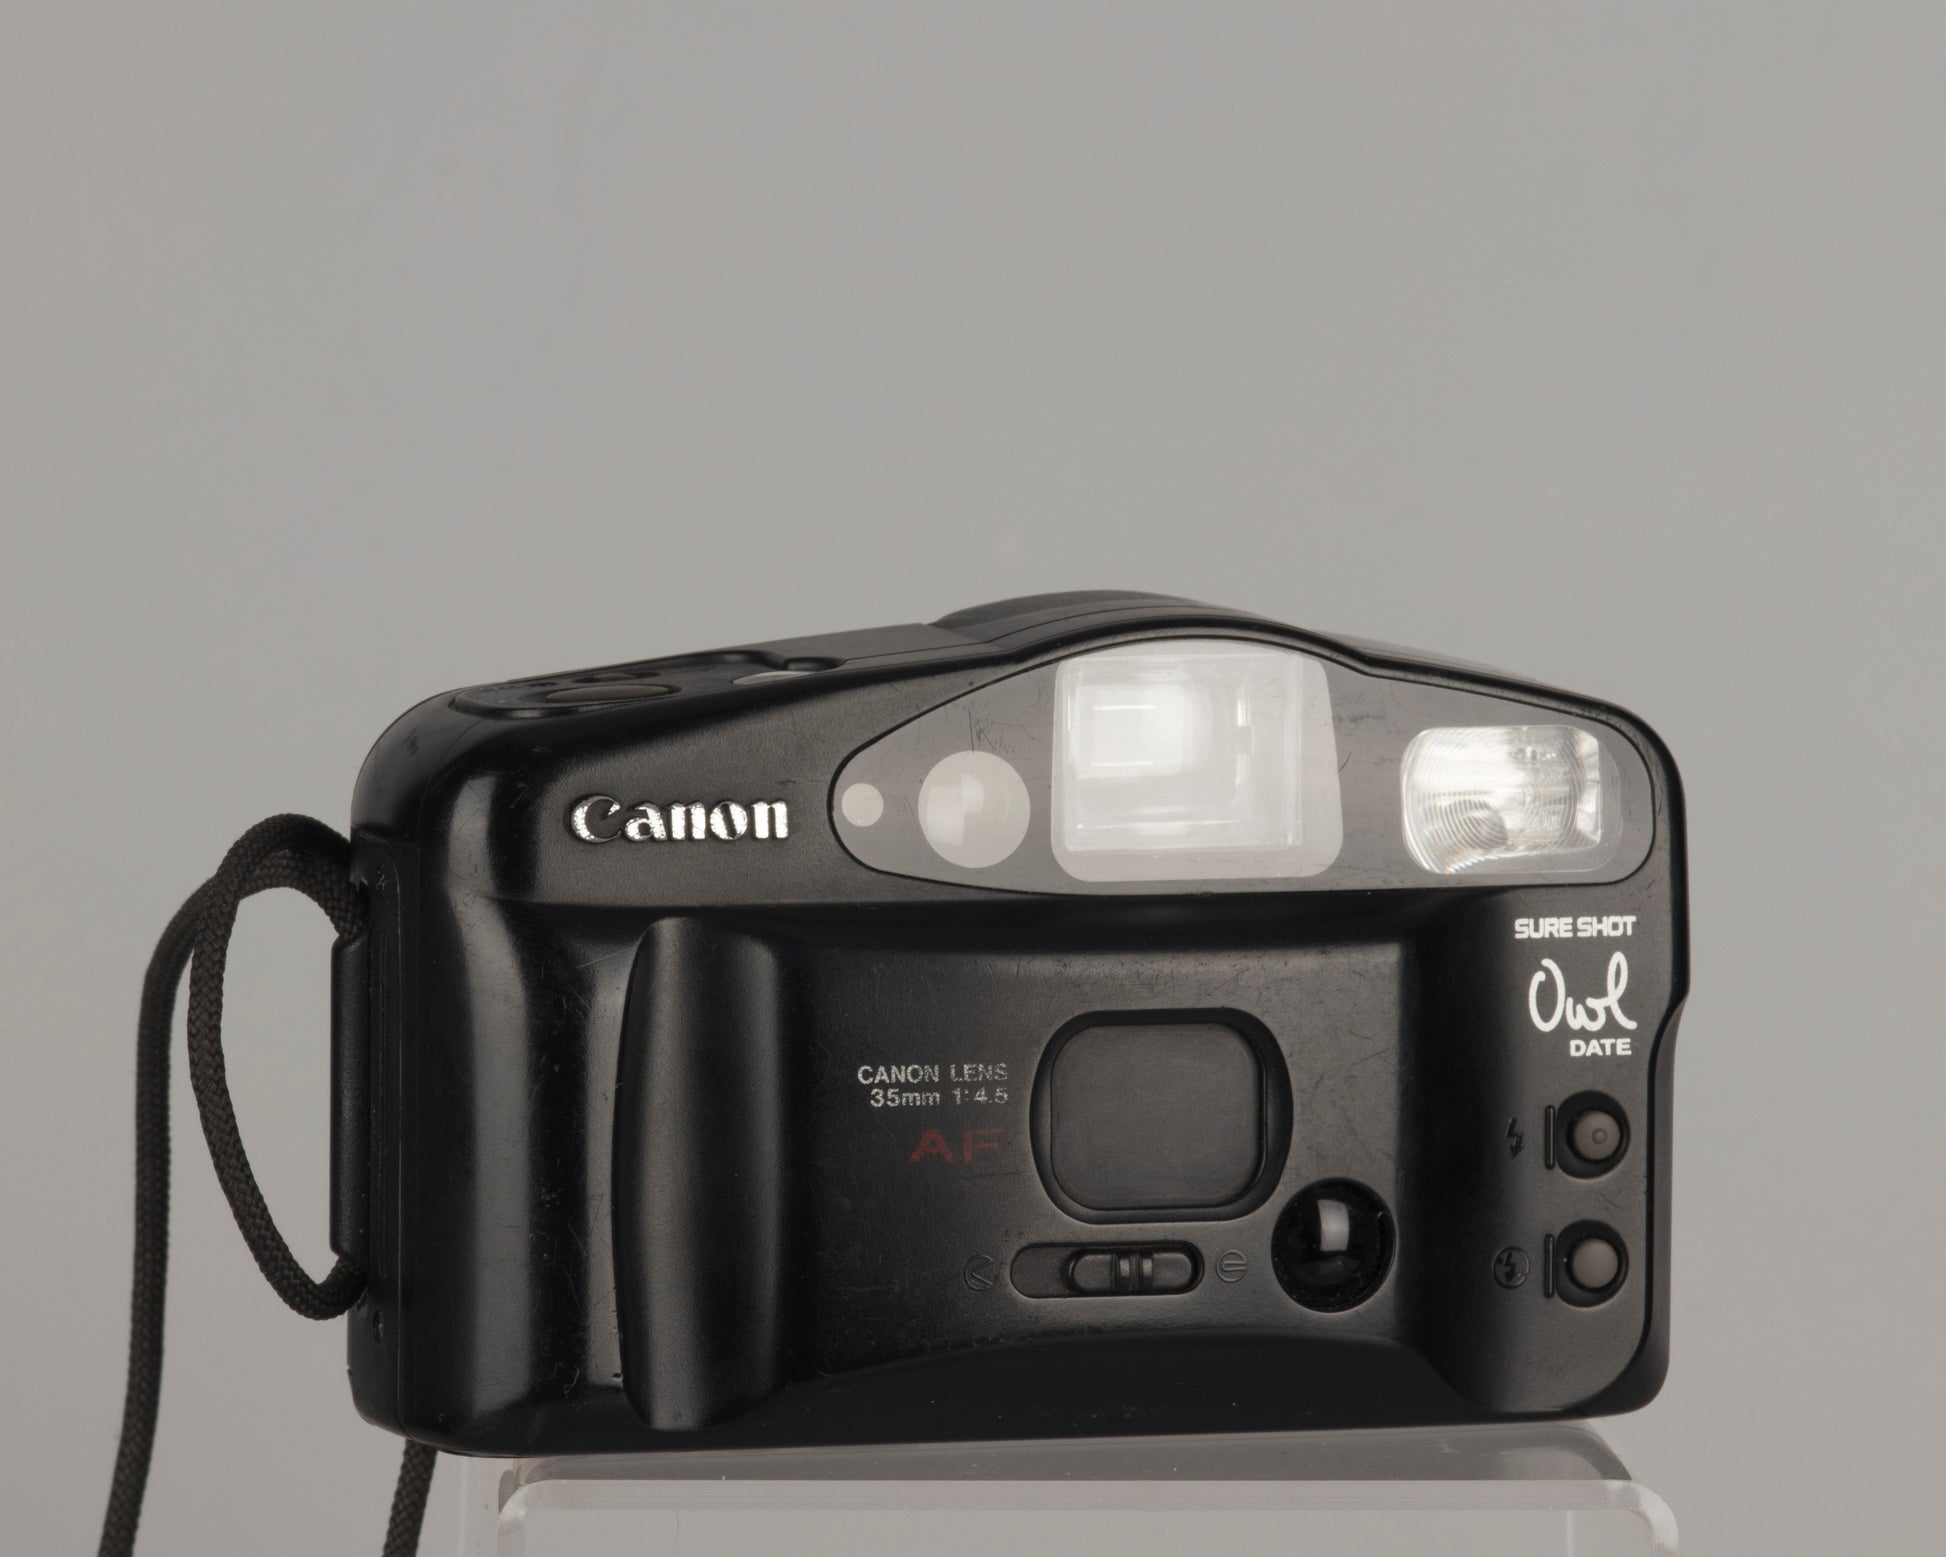 The Canon Sure Shot Owl Date is a 35mm point-and-shoot camera with a 35mm focal length lens